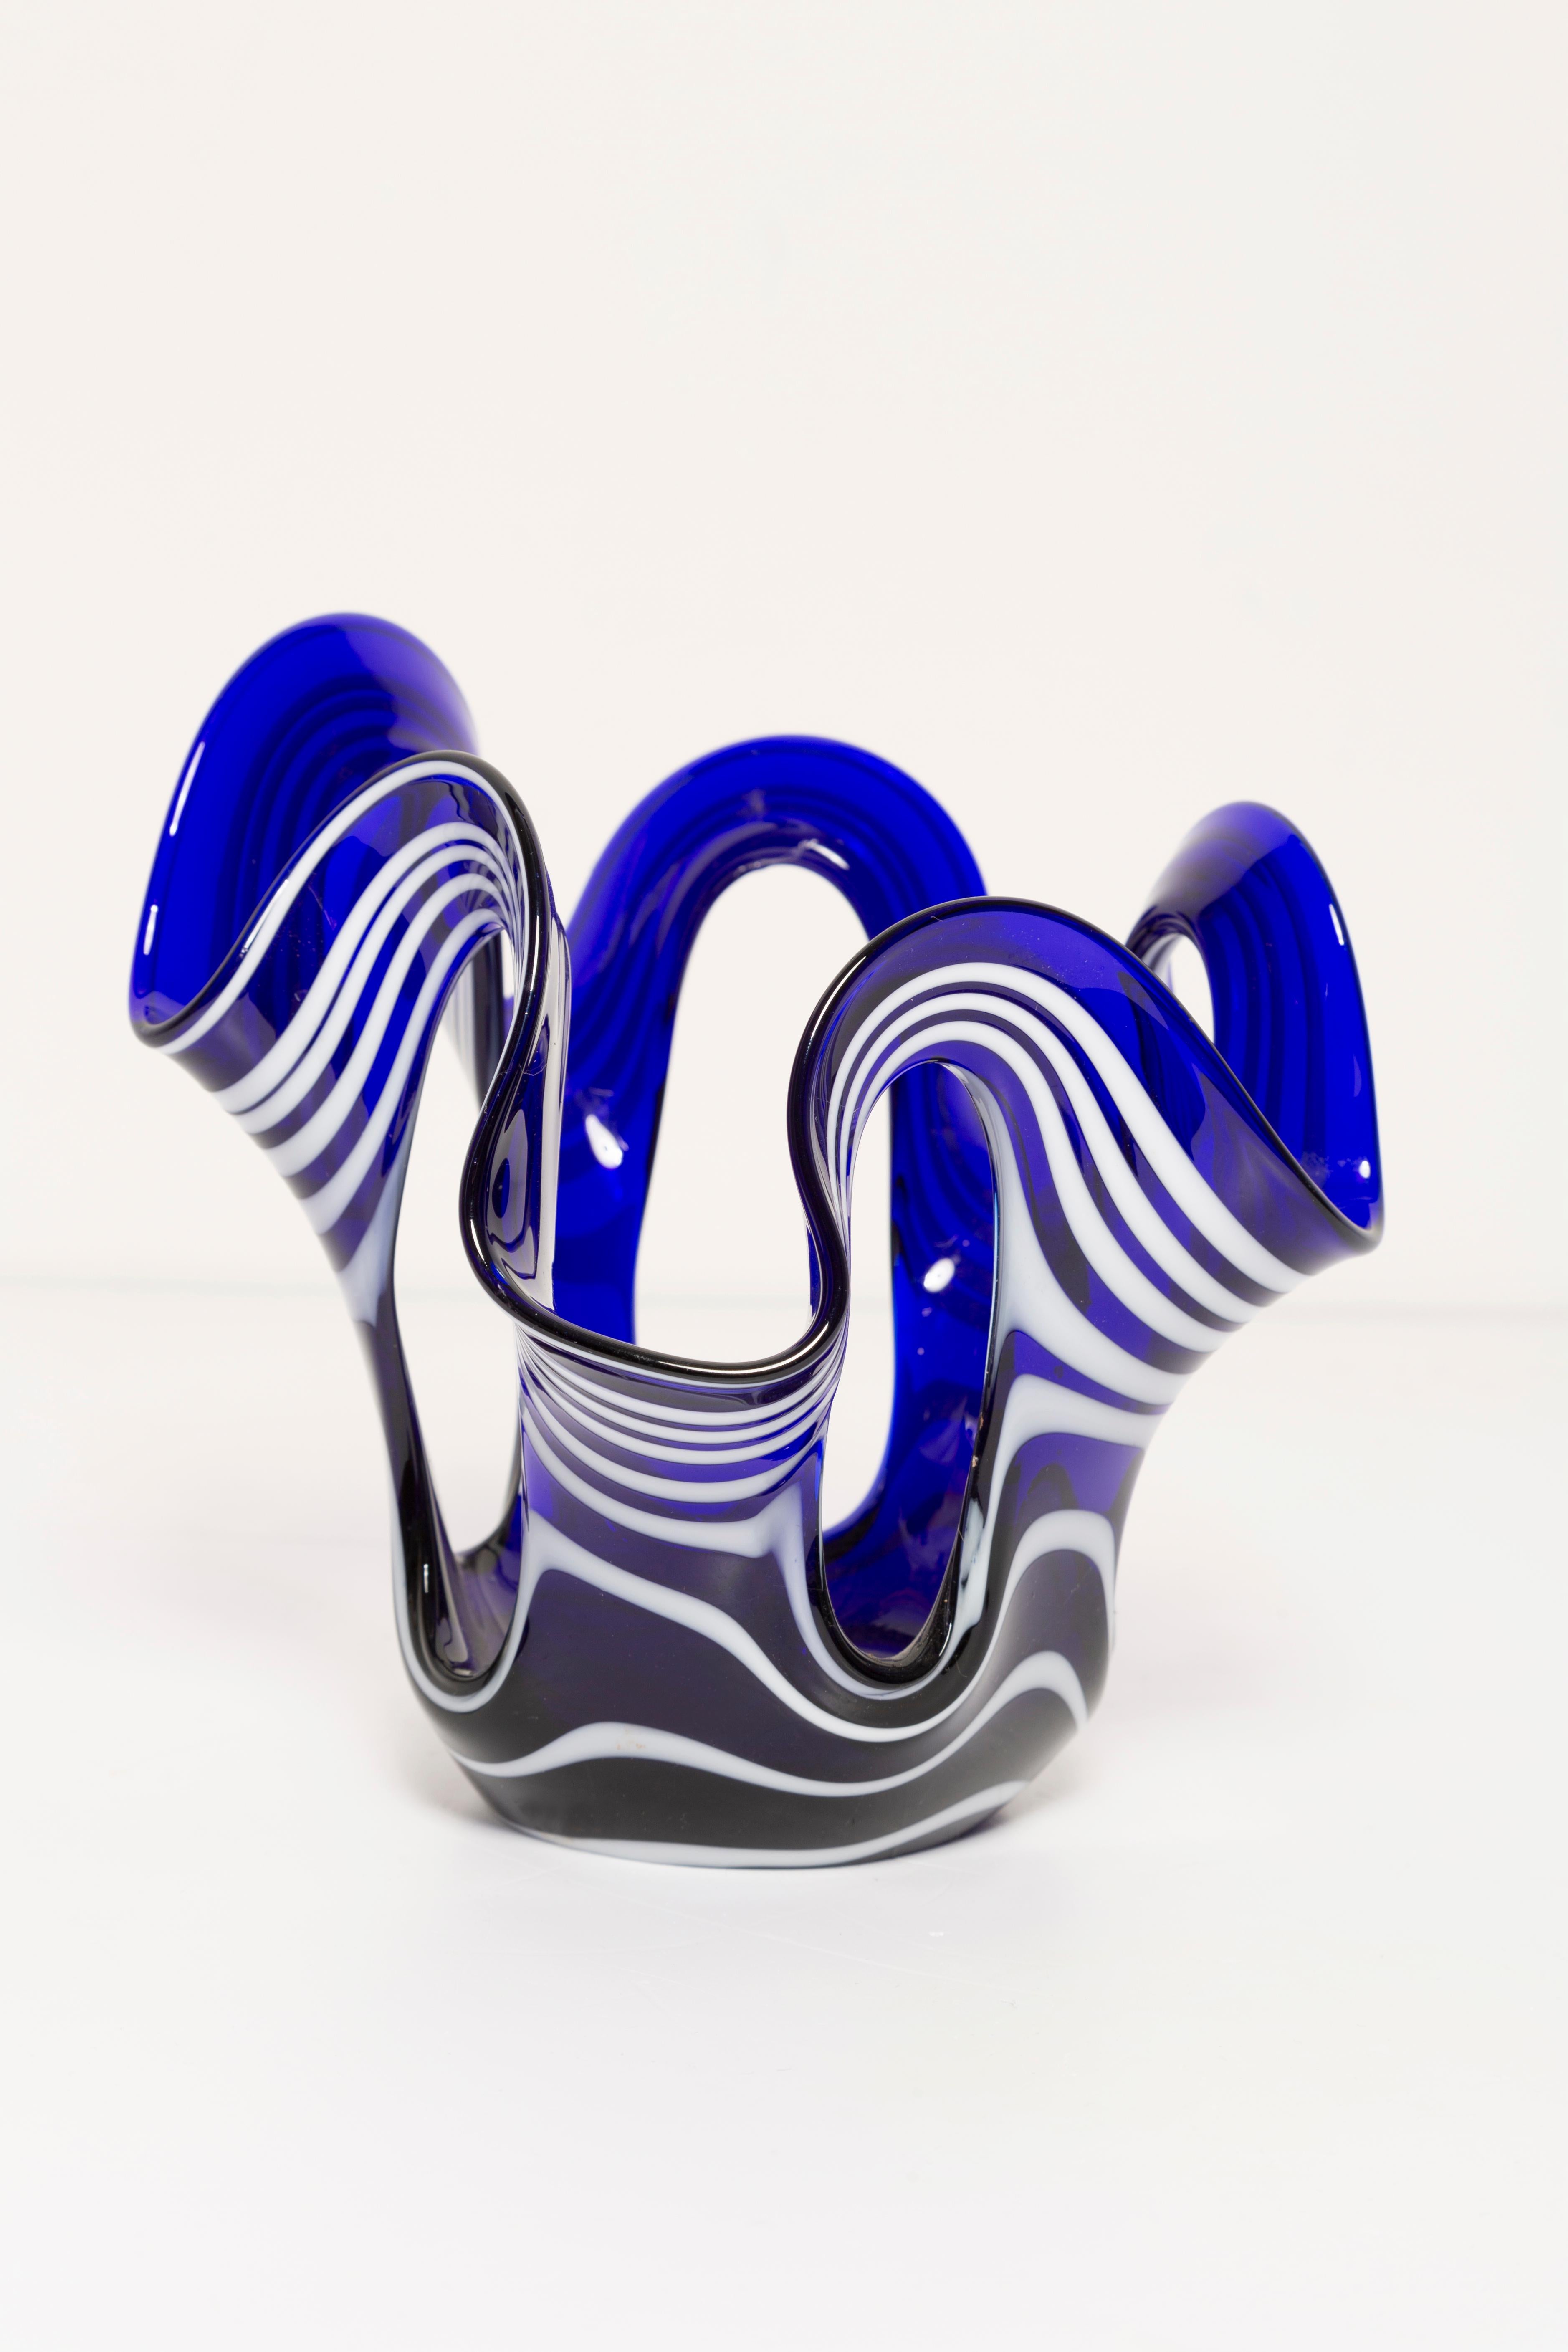 Blue in amazing organic shape. Produced in 1960s.
Glass in perfect condition. The vase looks like it has just been taken out of the box.

No jags, defects etc. The outer relief surface, the inner smooth. Thick glass vase, massive.

The irregular